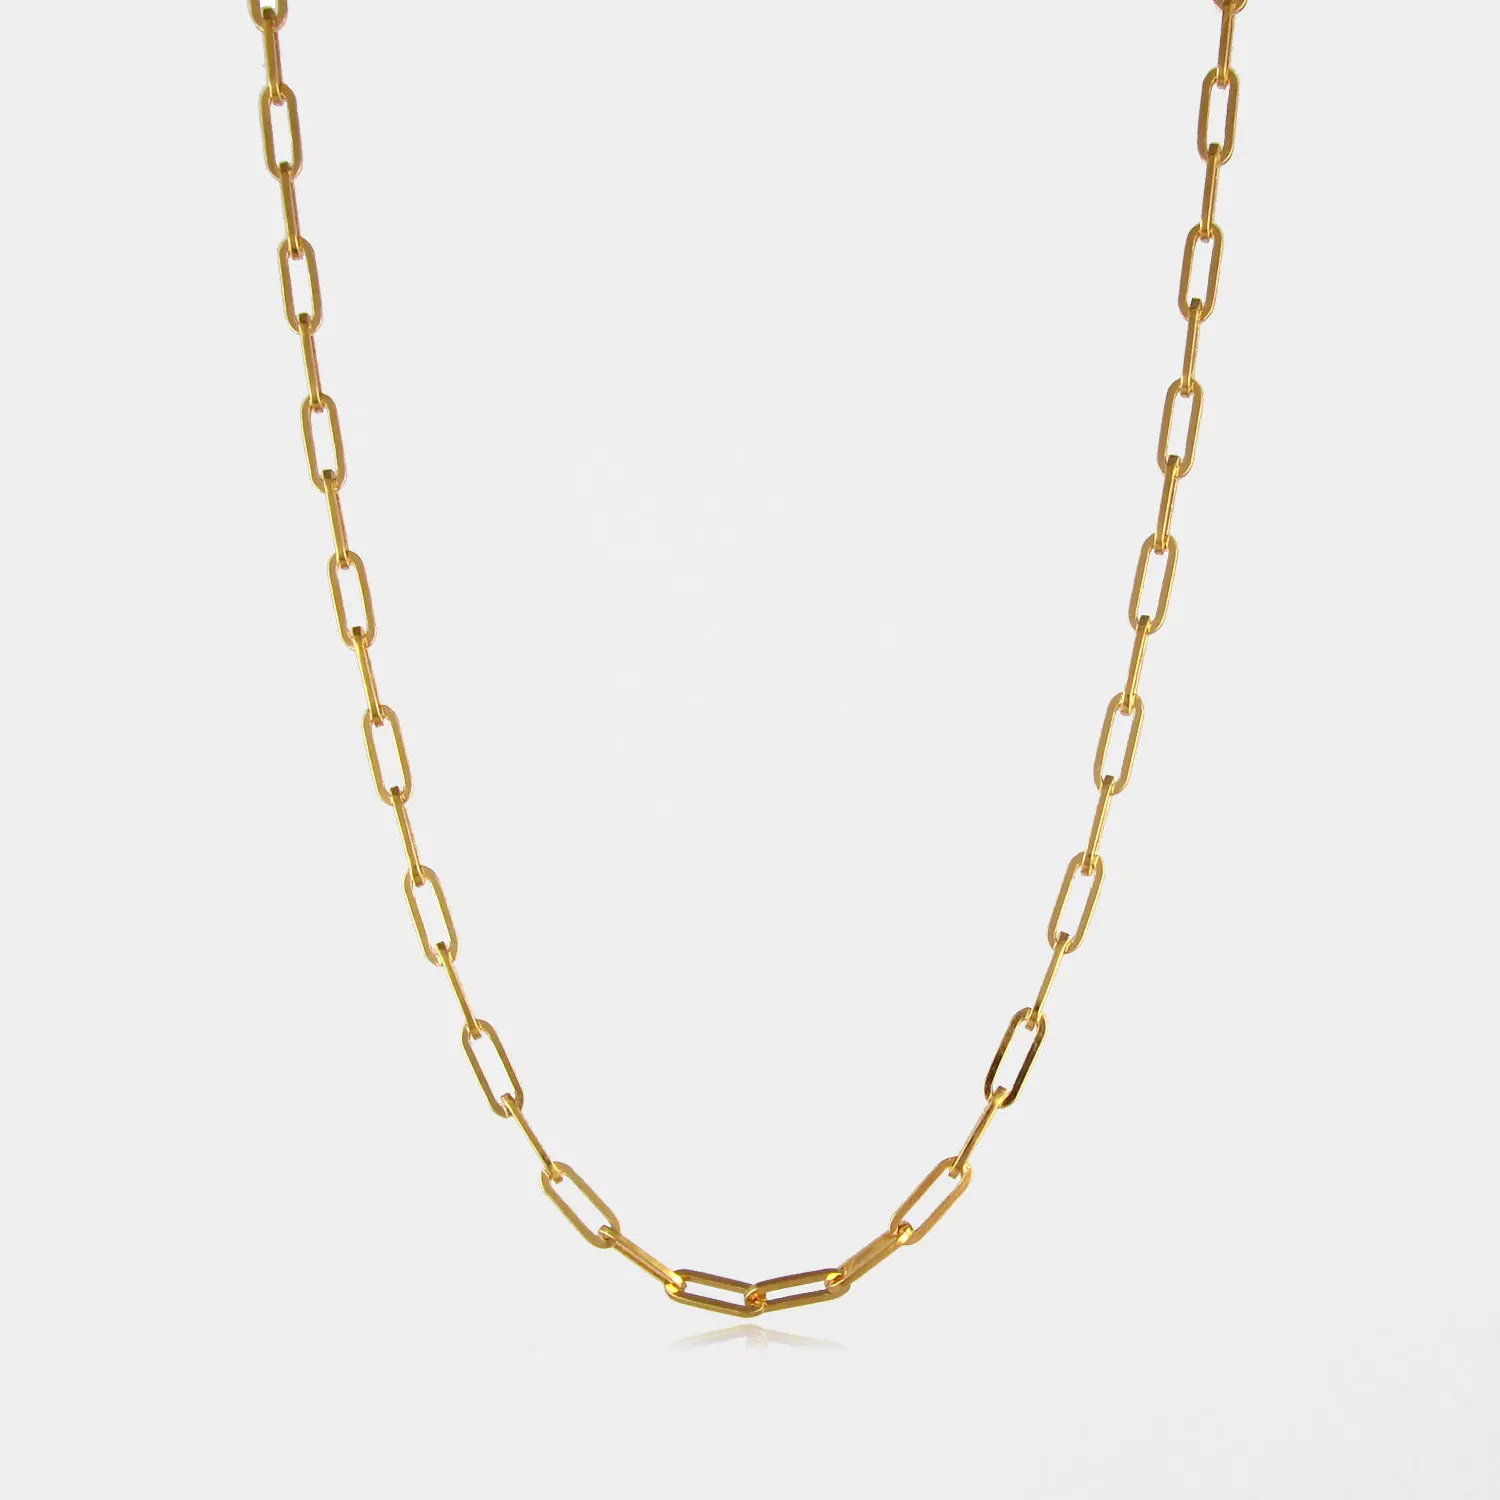 

Hot Selling Round Flat Rectangle Chain Link Choker Necklace Women 18k Gold Plated Paper Clip Paperclip Link Chain Necklaces, Picture shows